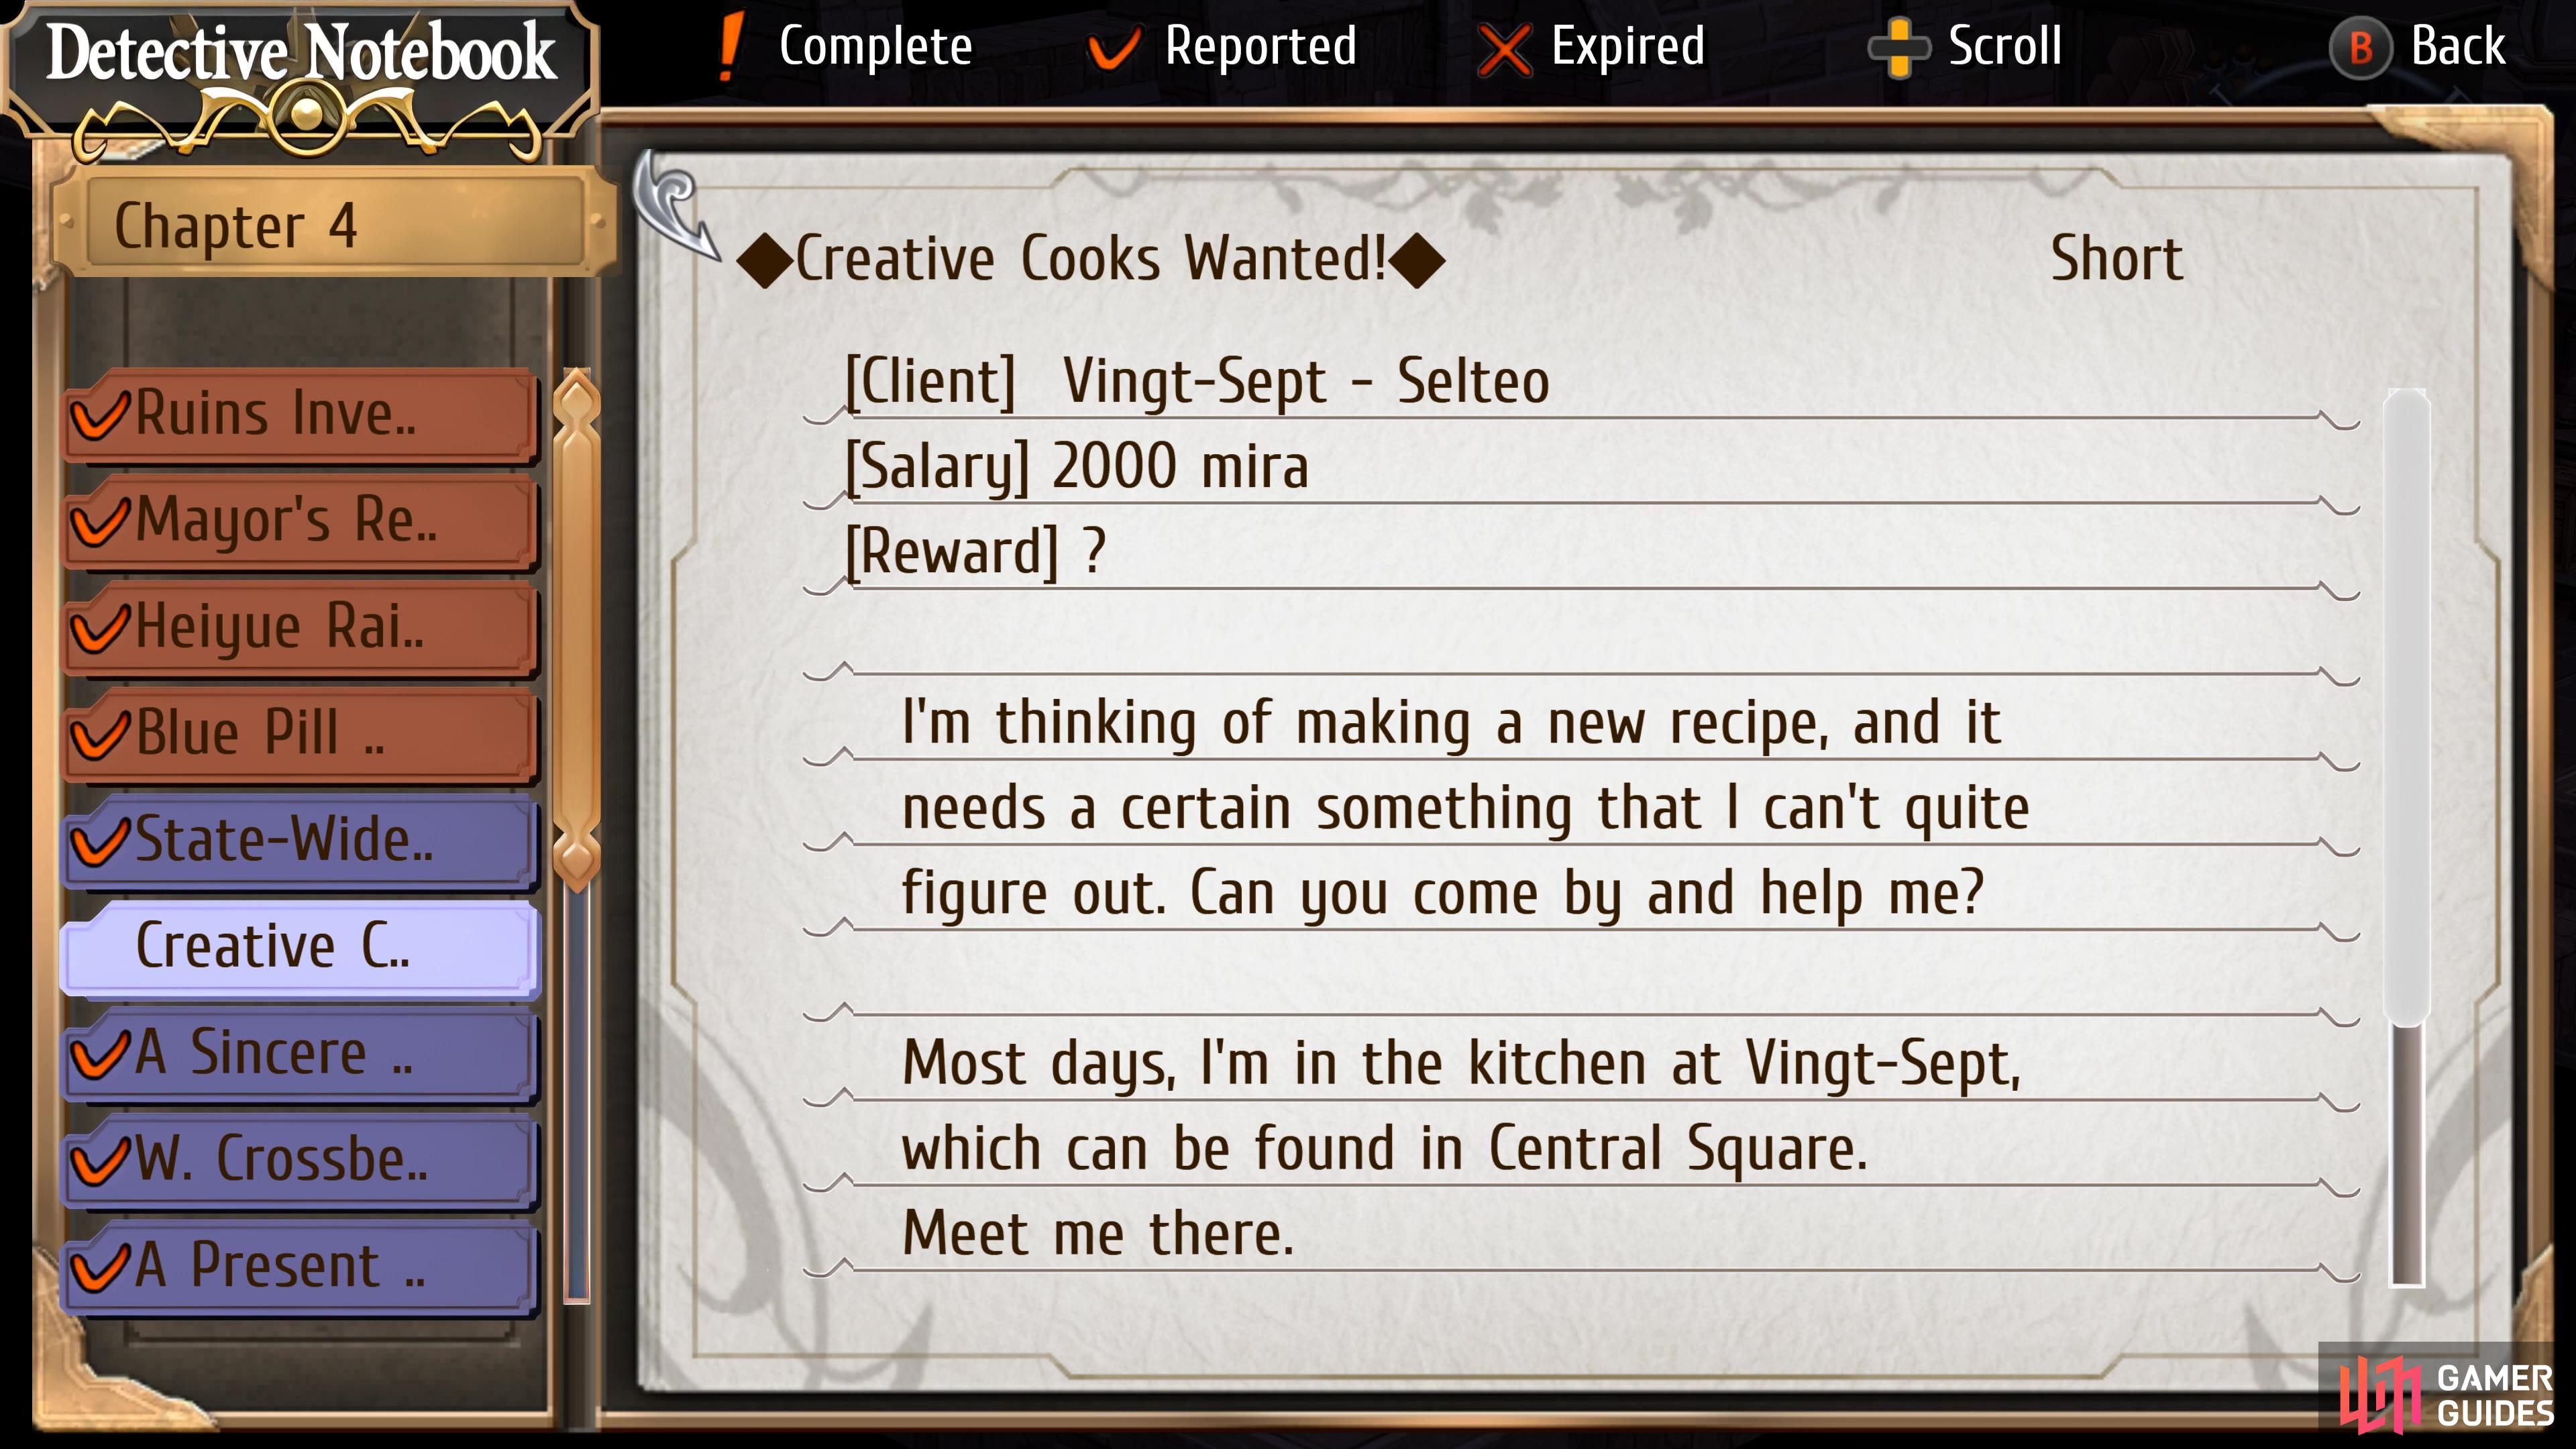 Creative Cooks Wanted is a request you accept in Chapter 4 Day 1, but should complete during the Finale.